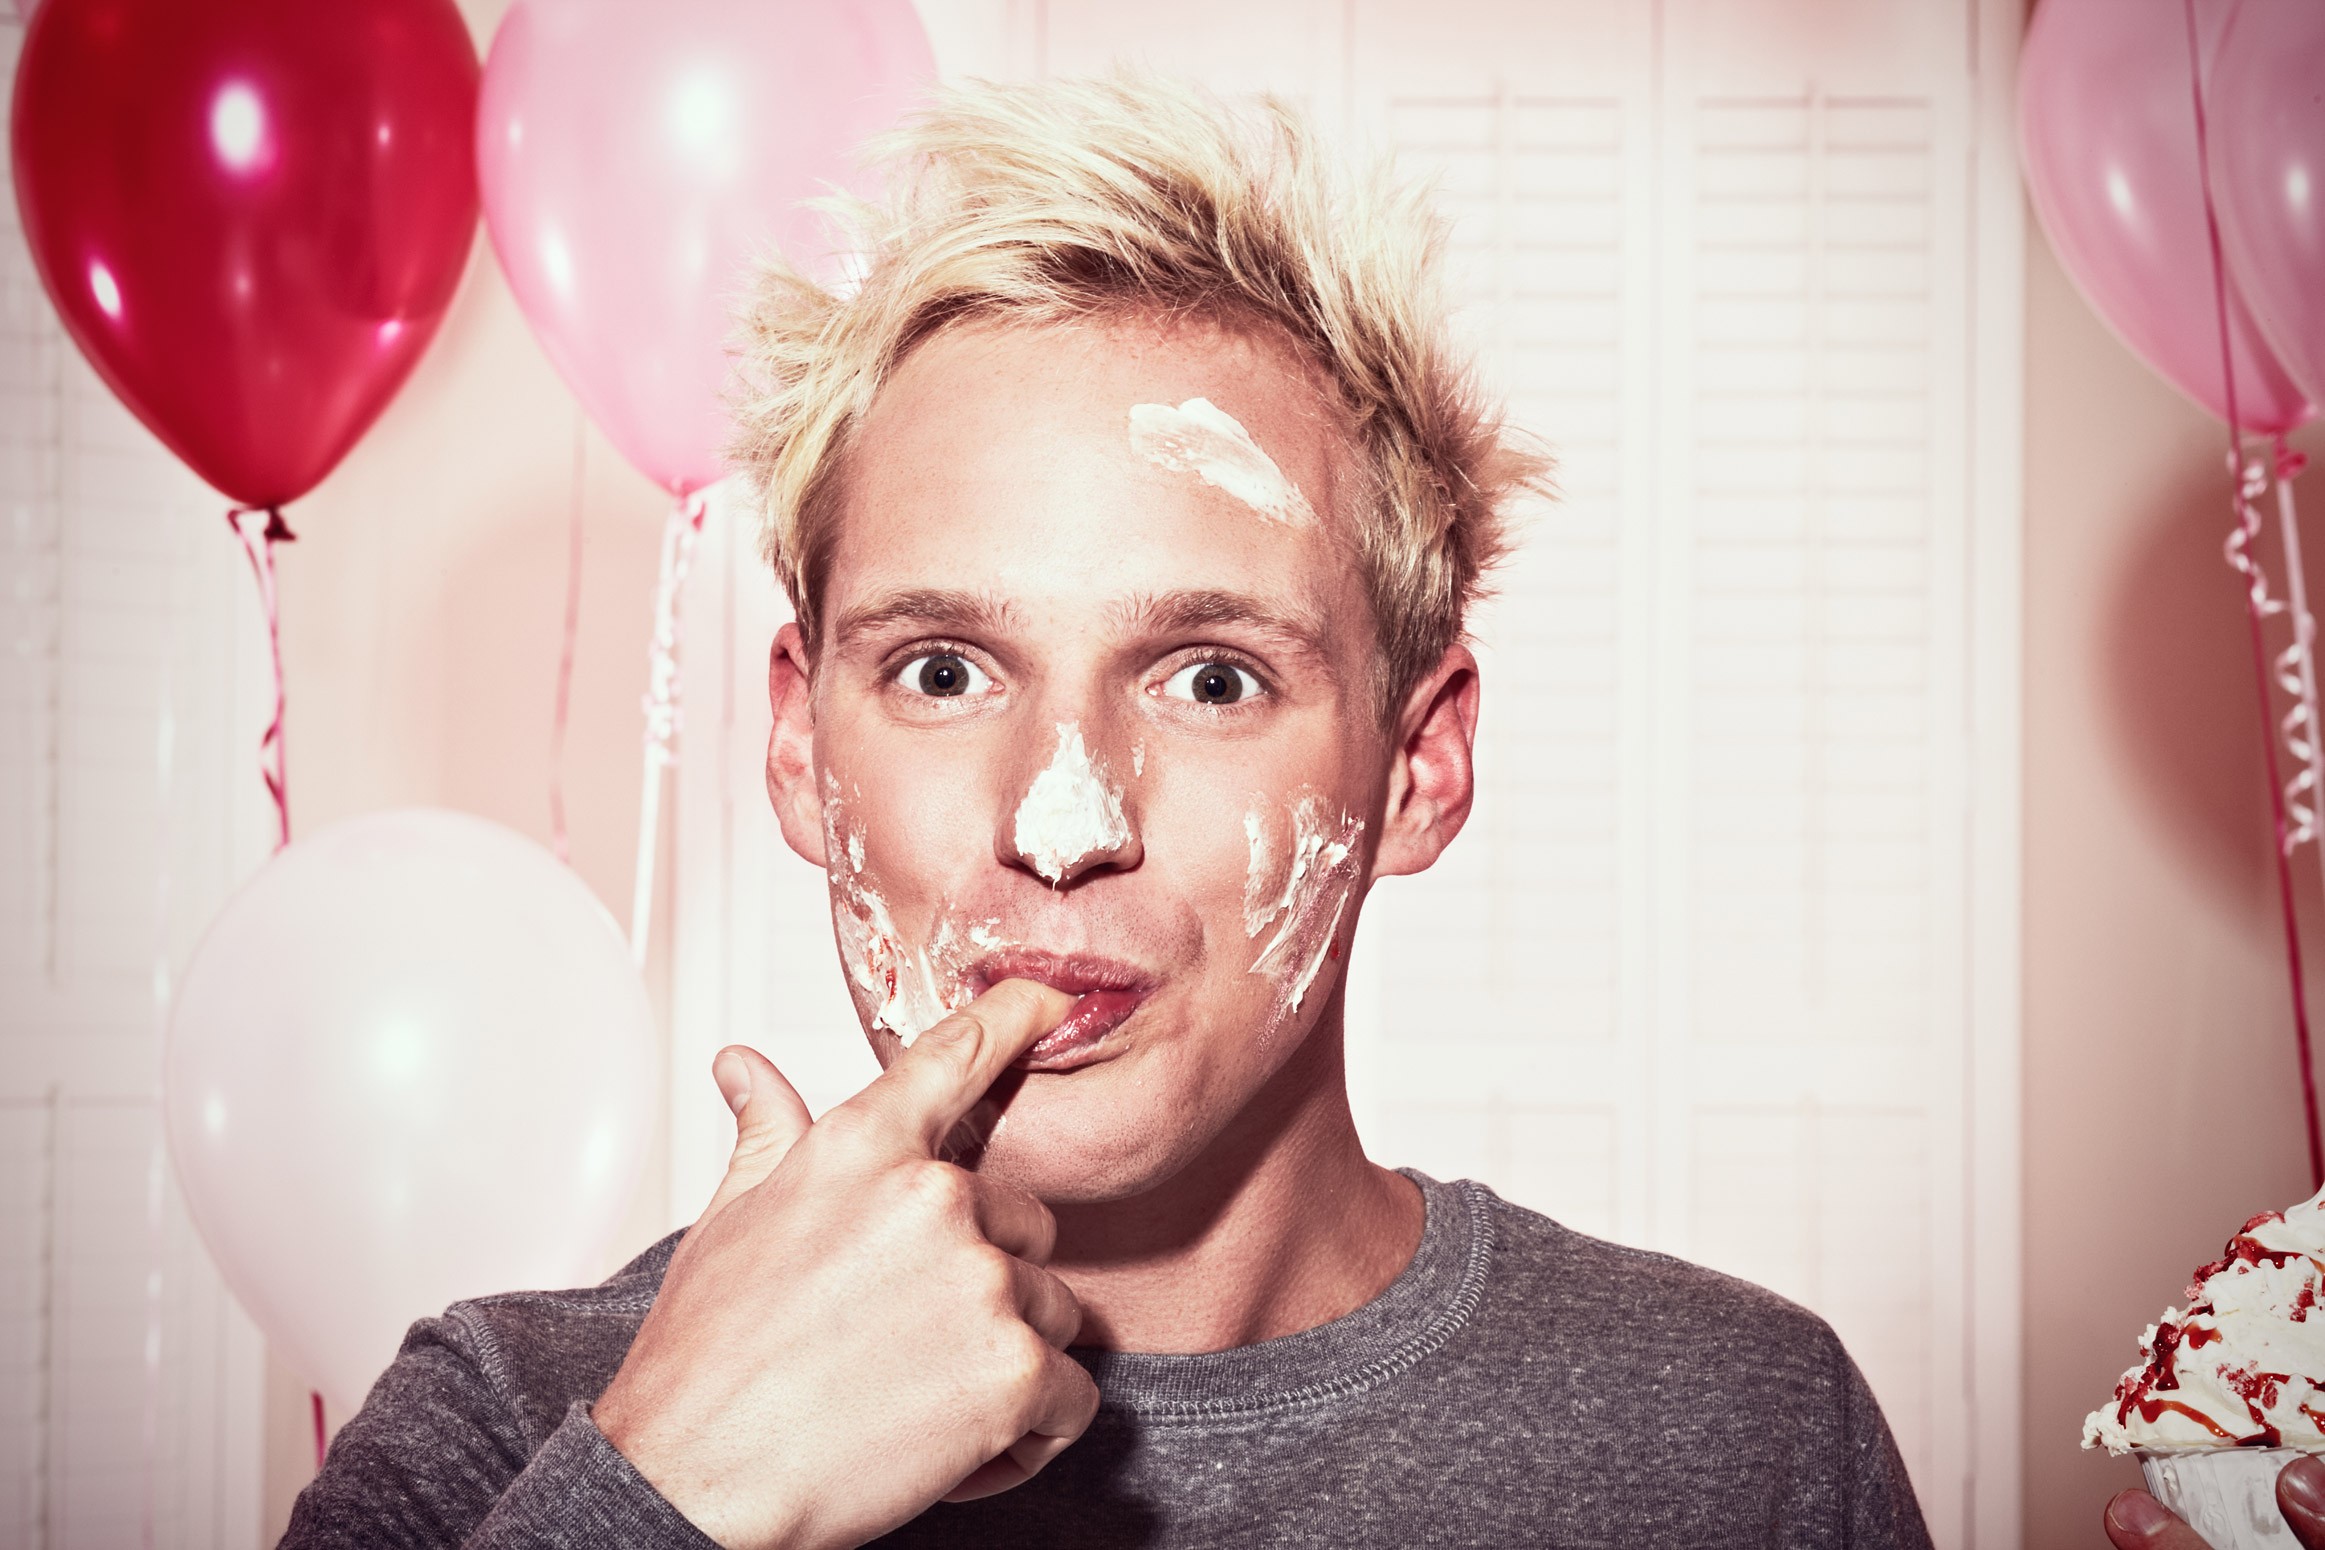 jamie-laing-made-in-chelsea-candy-kittens-ruth-rose-london-photoshoot-fashion-brand-celebrity-photographer-11